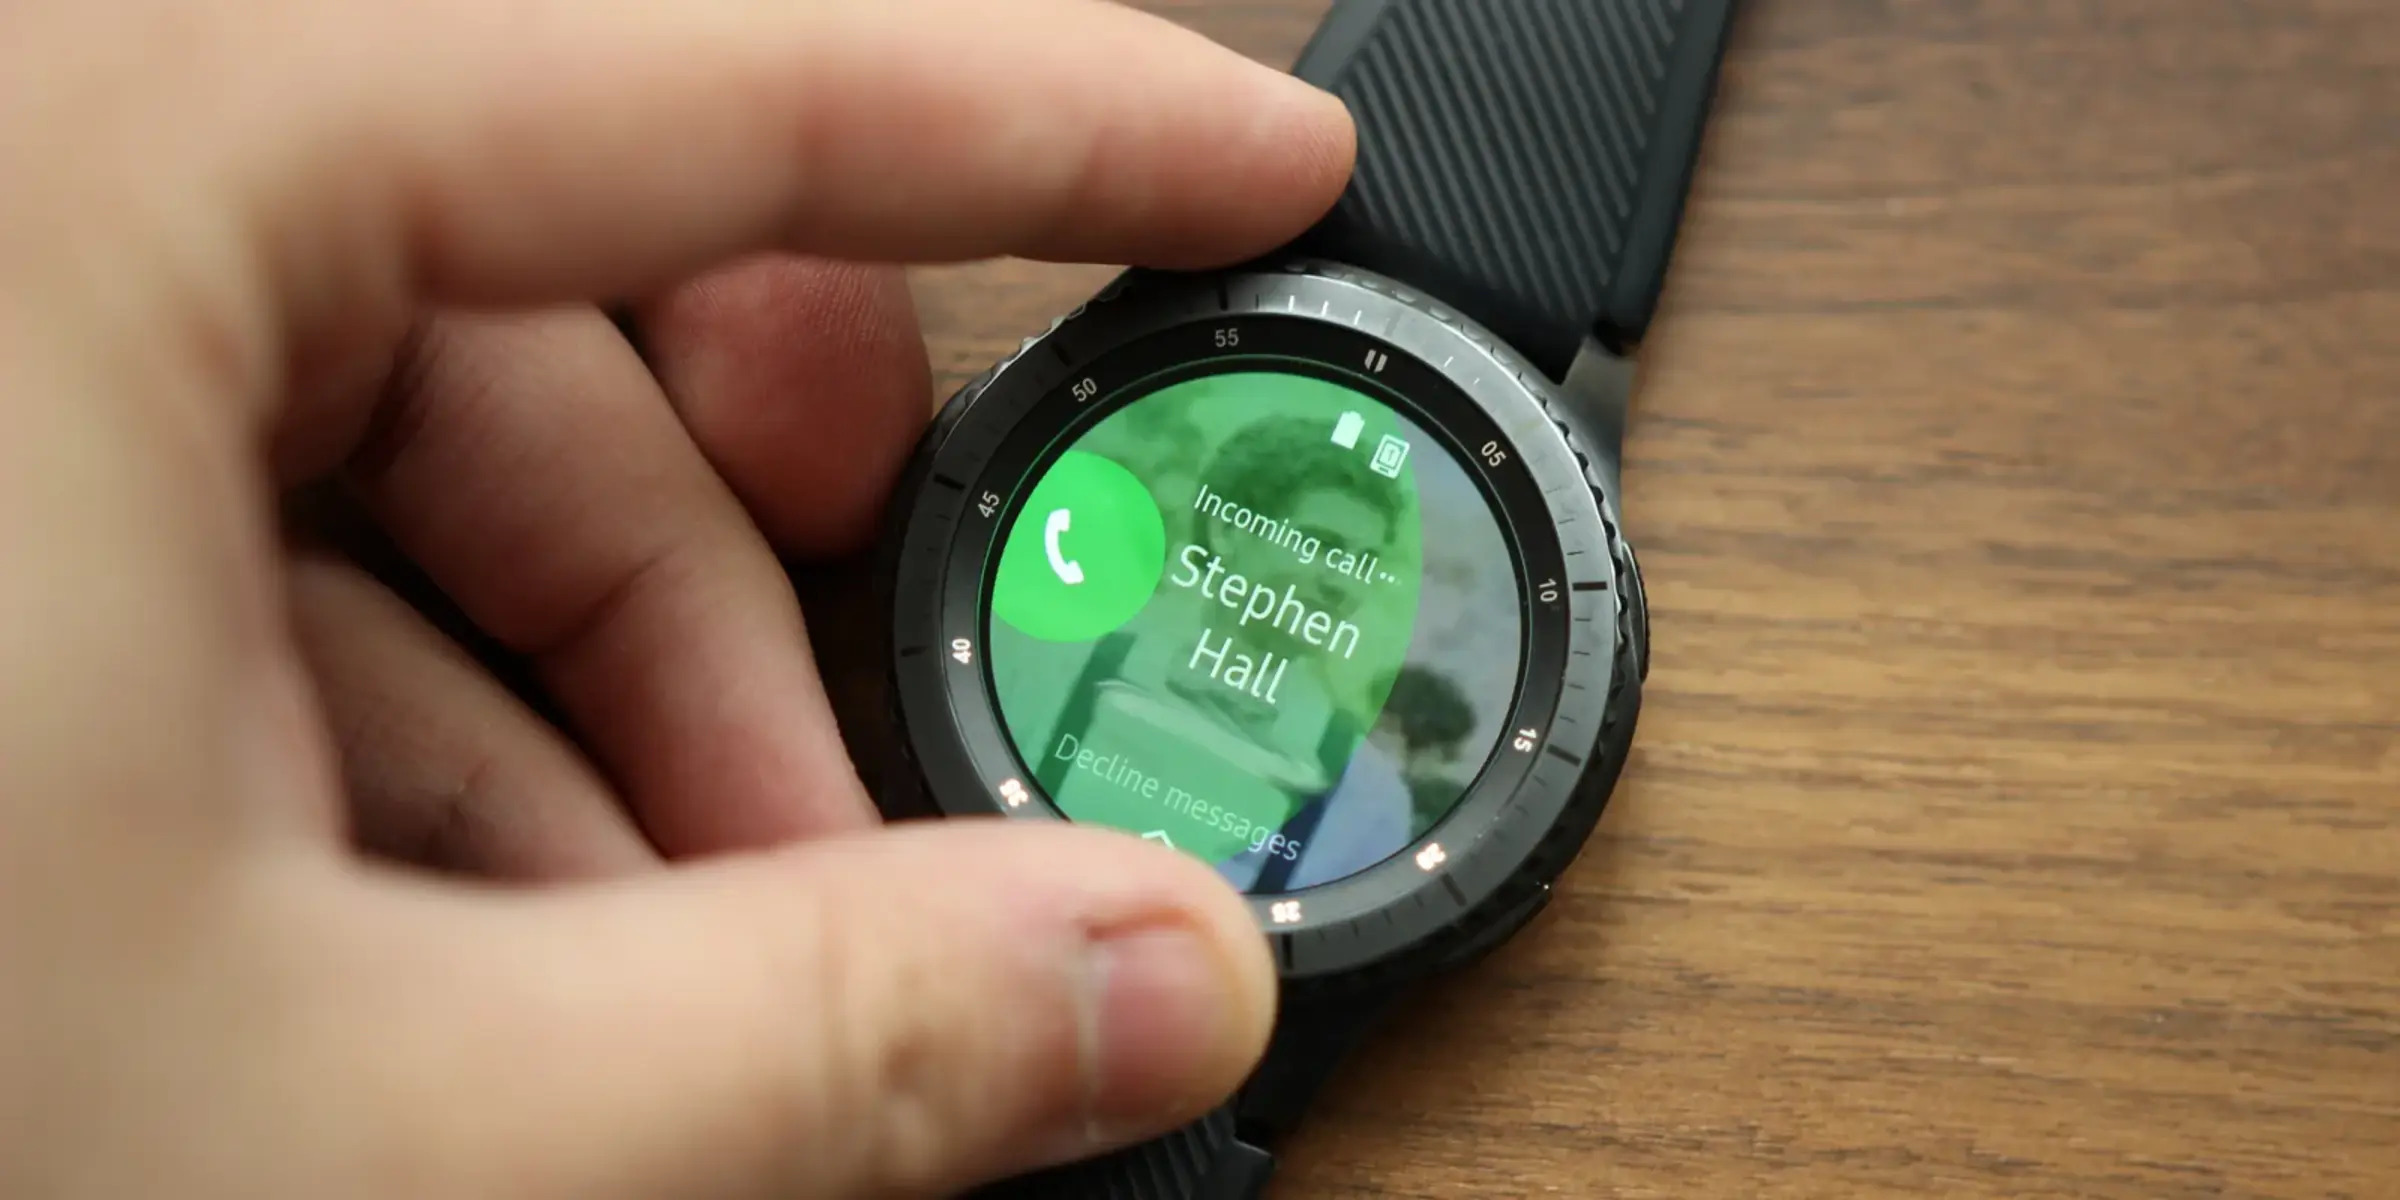 How To Answer A Call On A Samsung Galaxy Watch